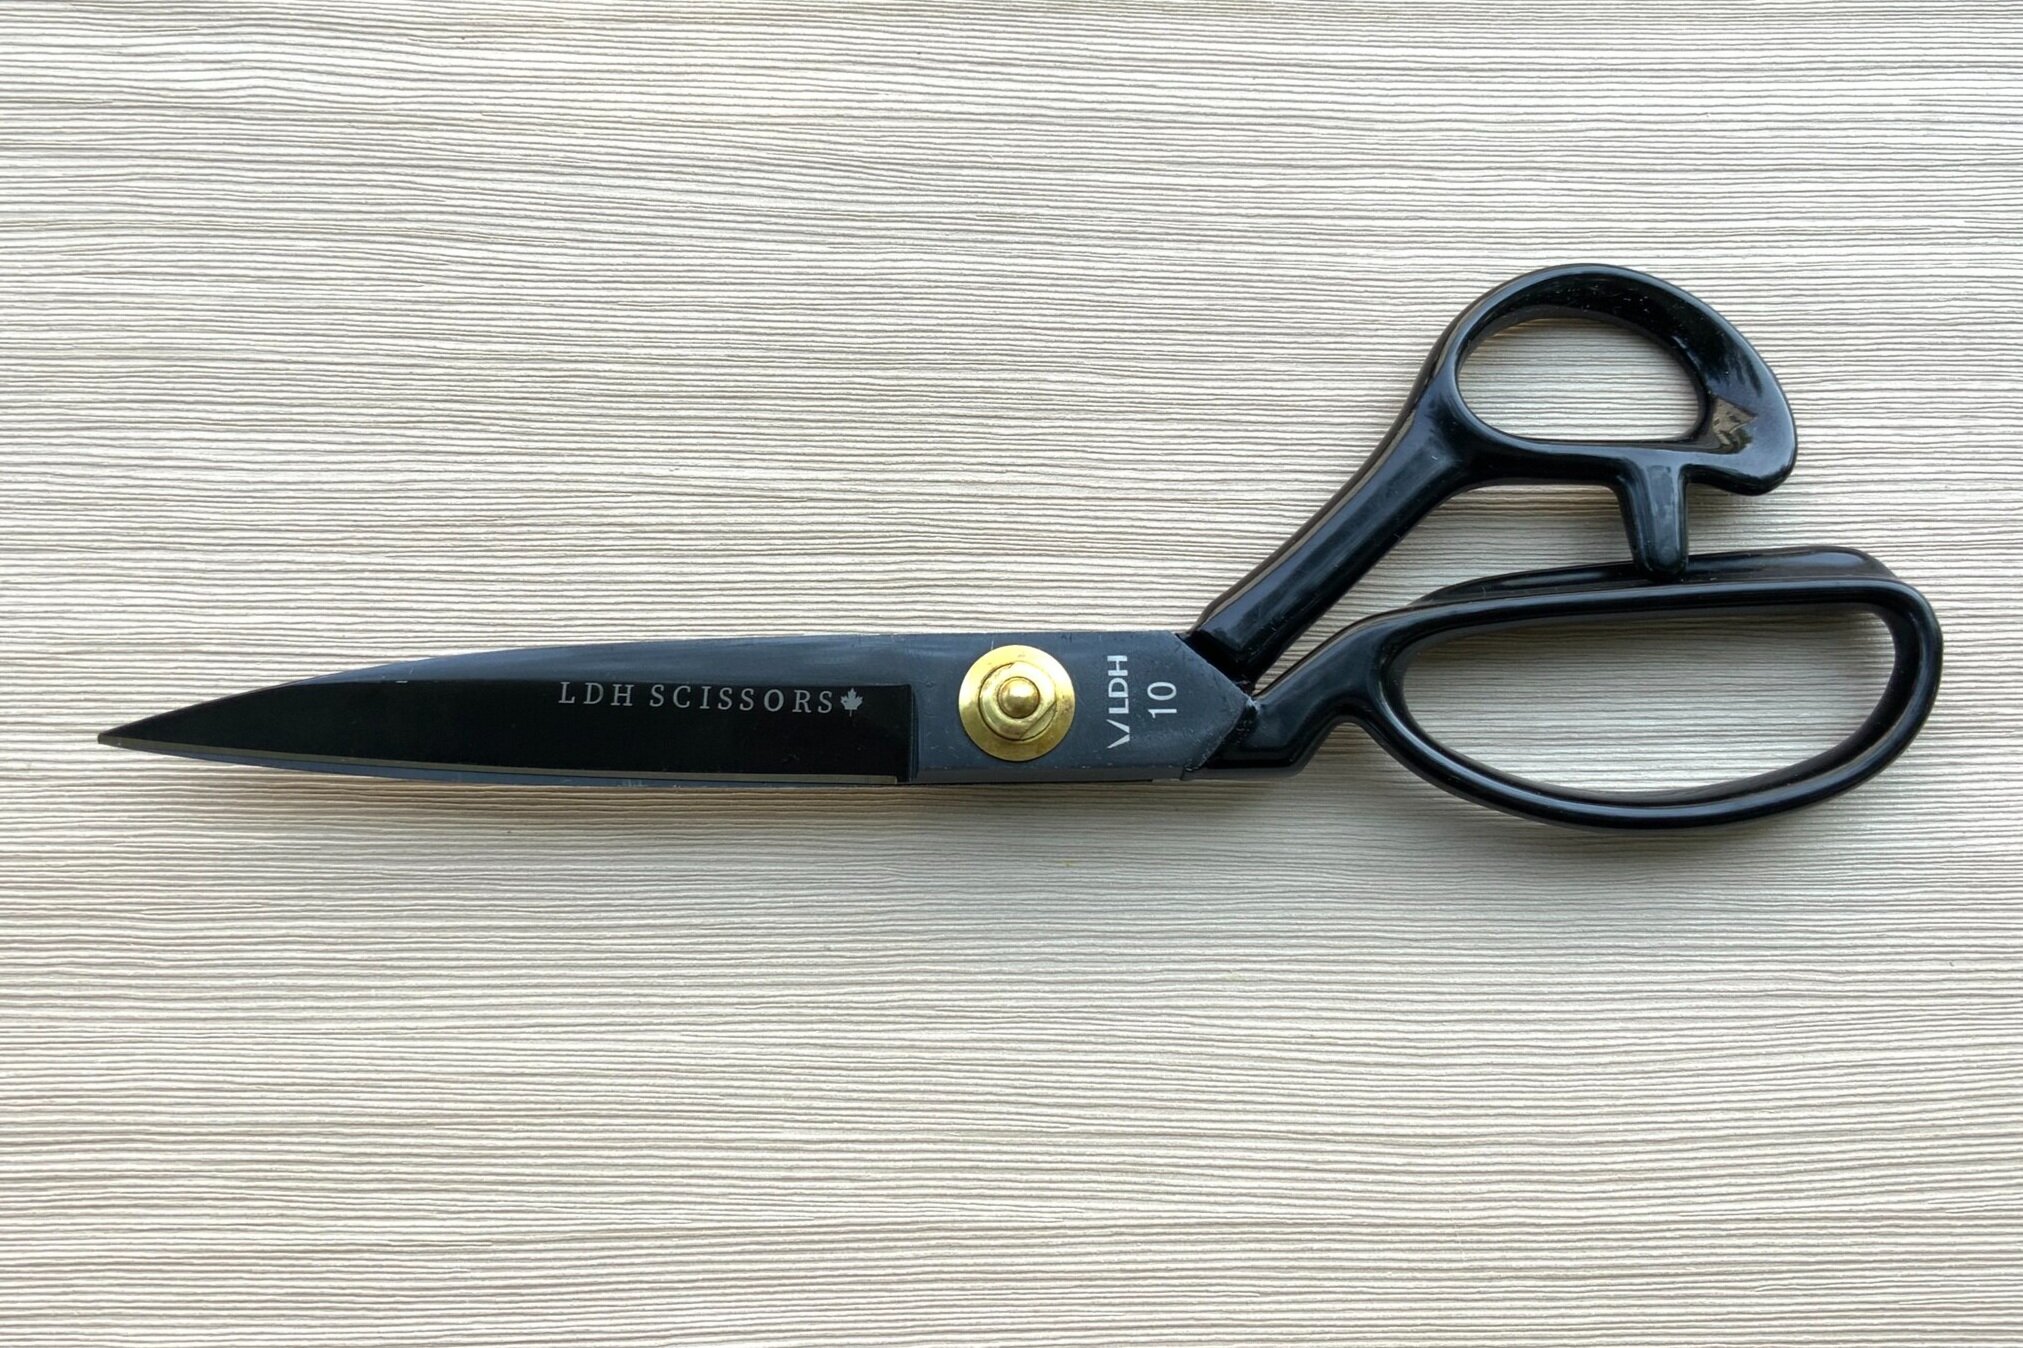 Midnight Edition Fabric Shears 10 – by the lakeside